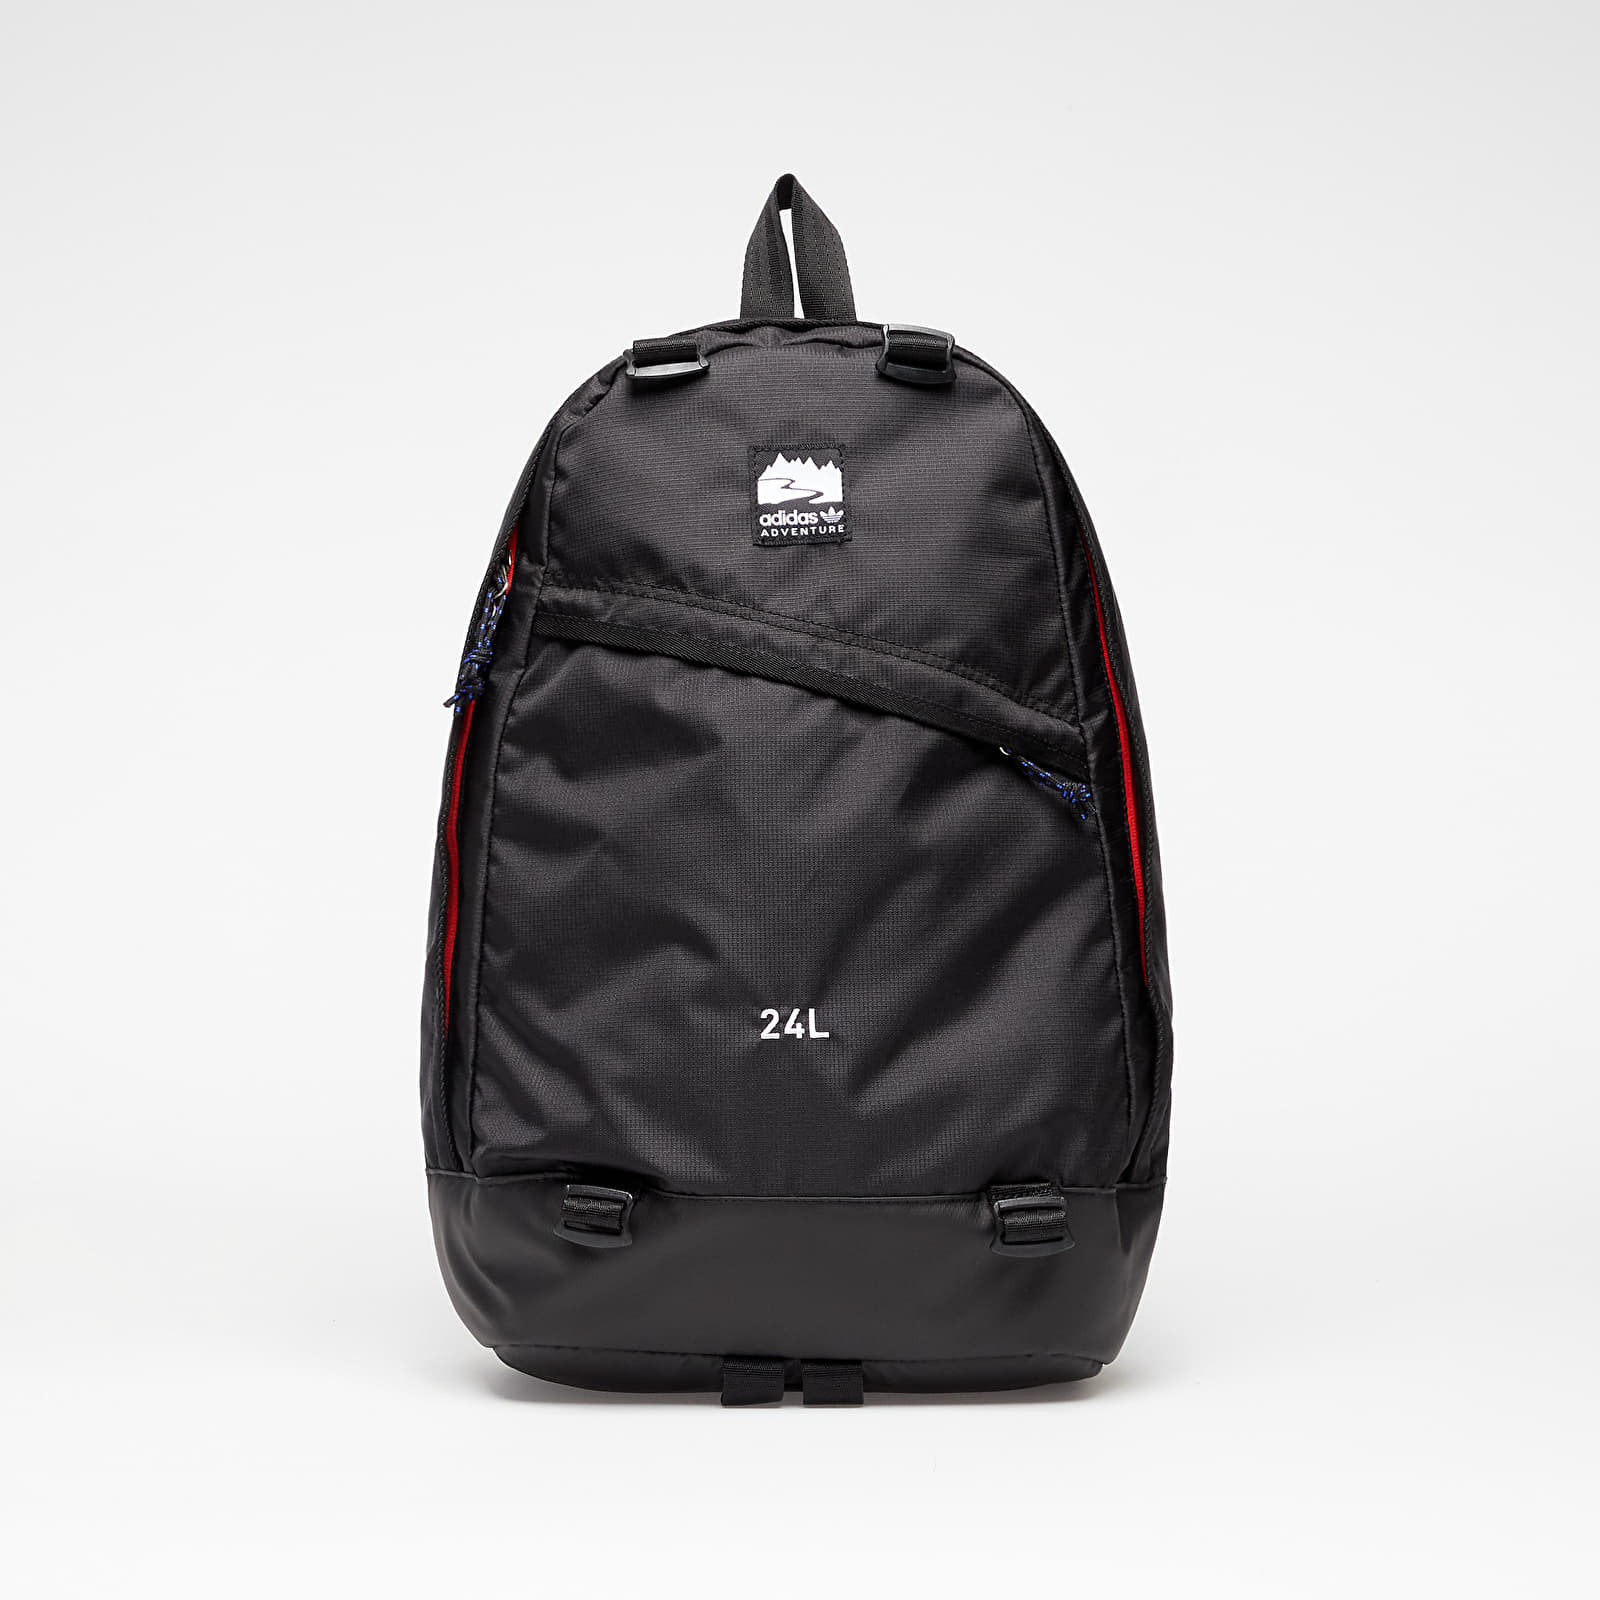 Раници adidas Backpack S Black/ Brired/ White 790465